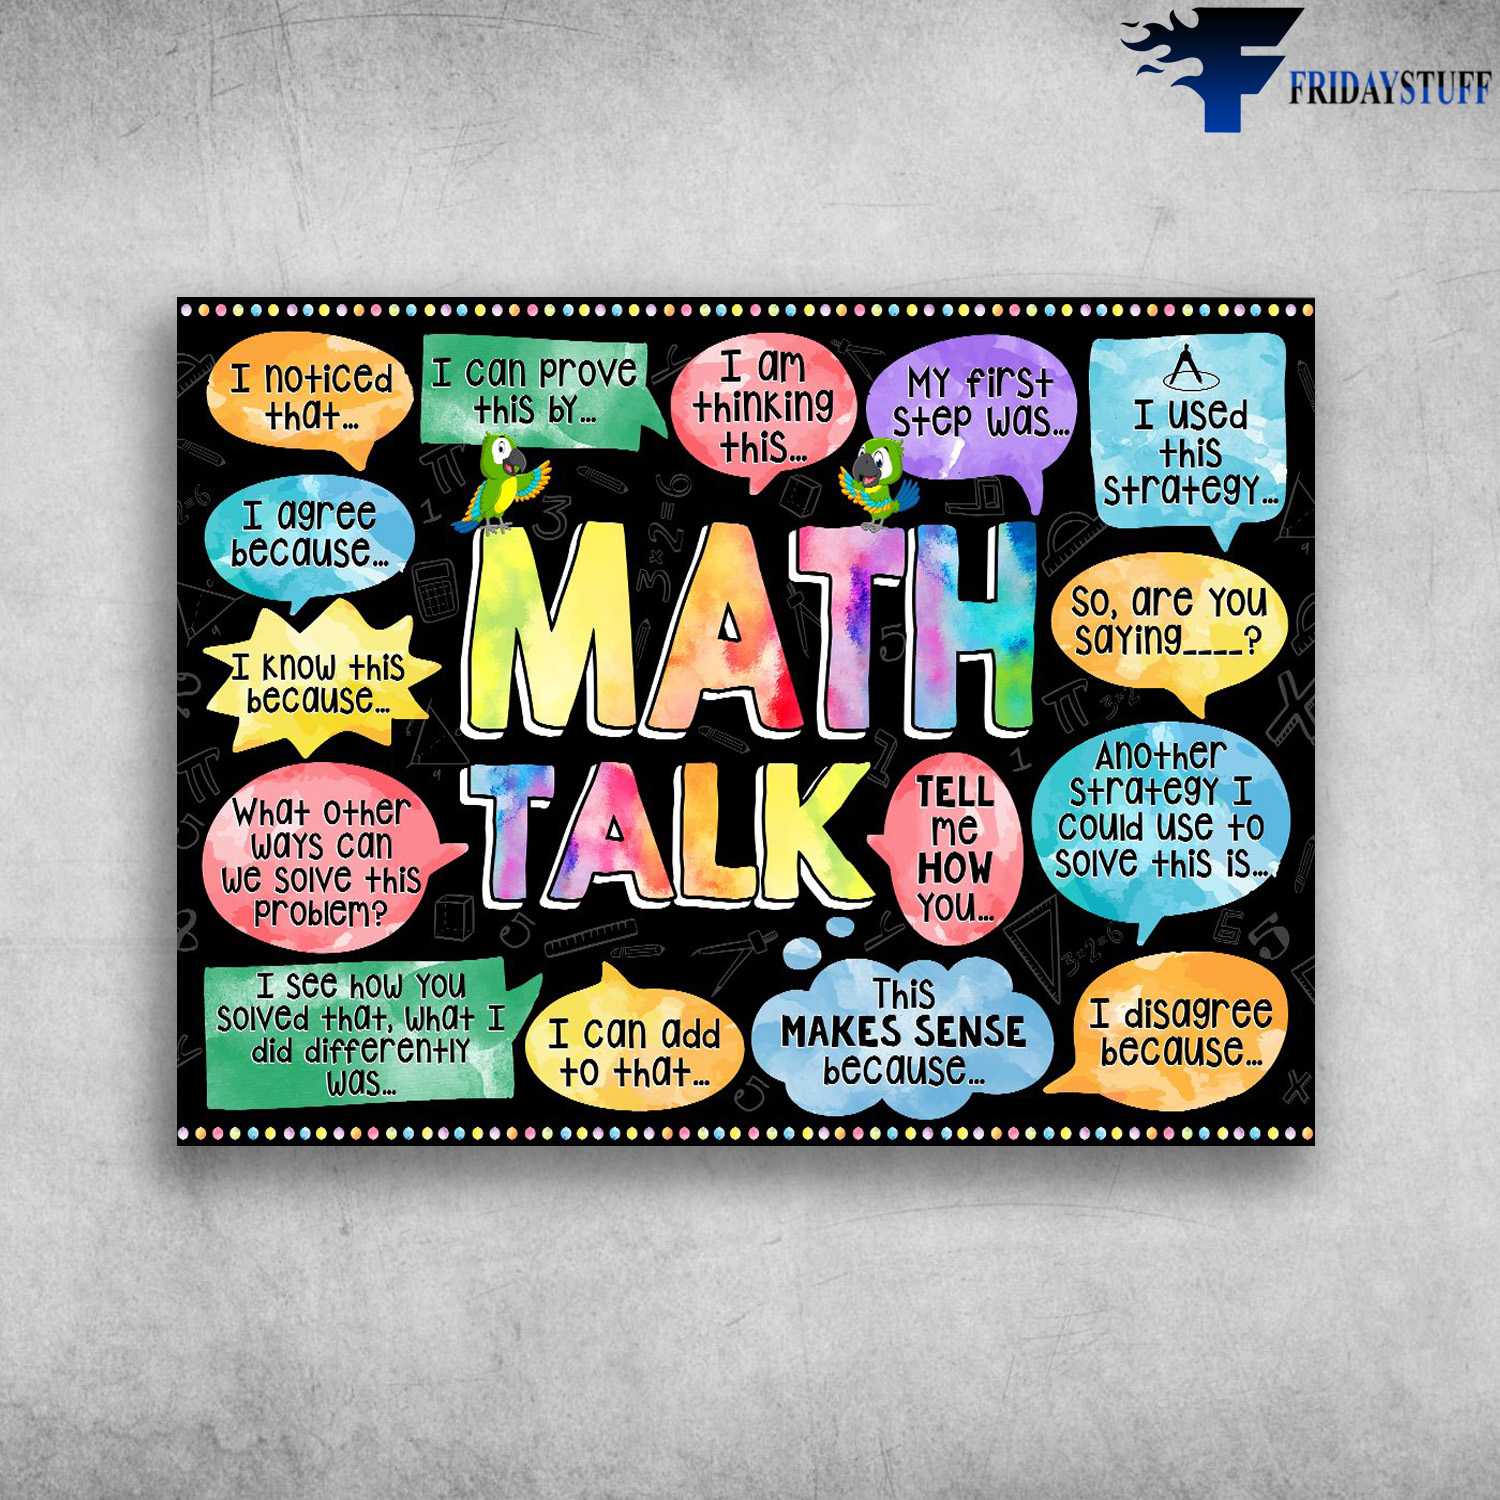 Math Talk, Back To School - I Noticed That, I Can Prove This By, I Am Thinking This, My First Step Was, I Used This Strategy